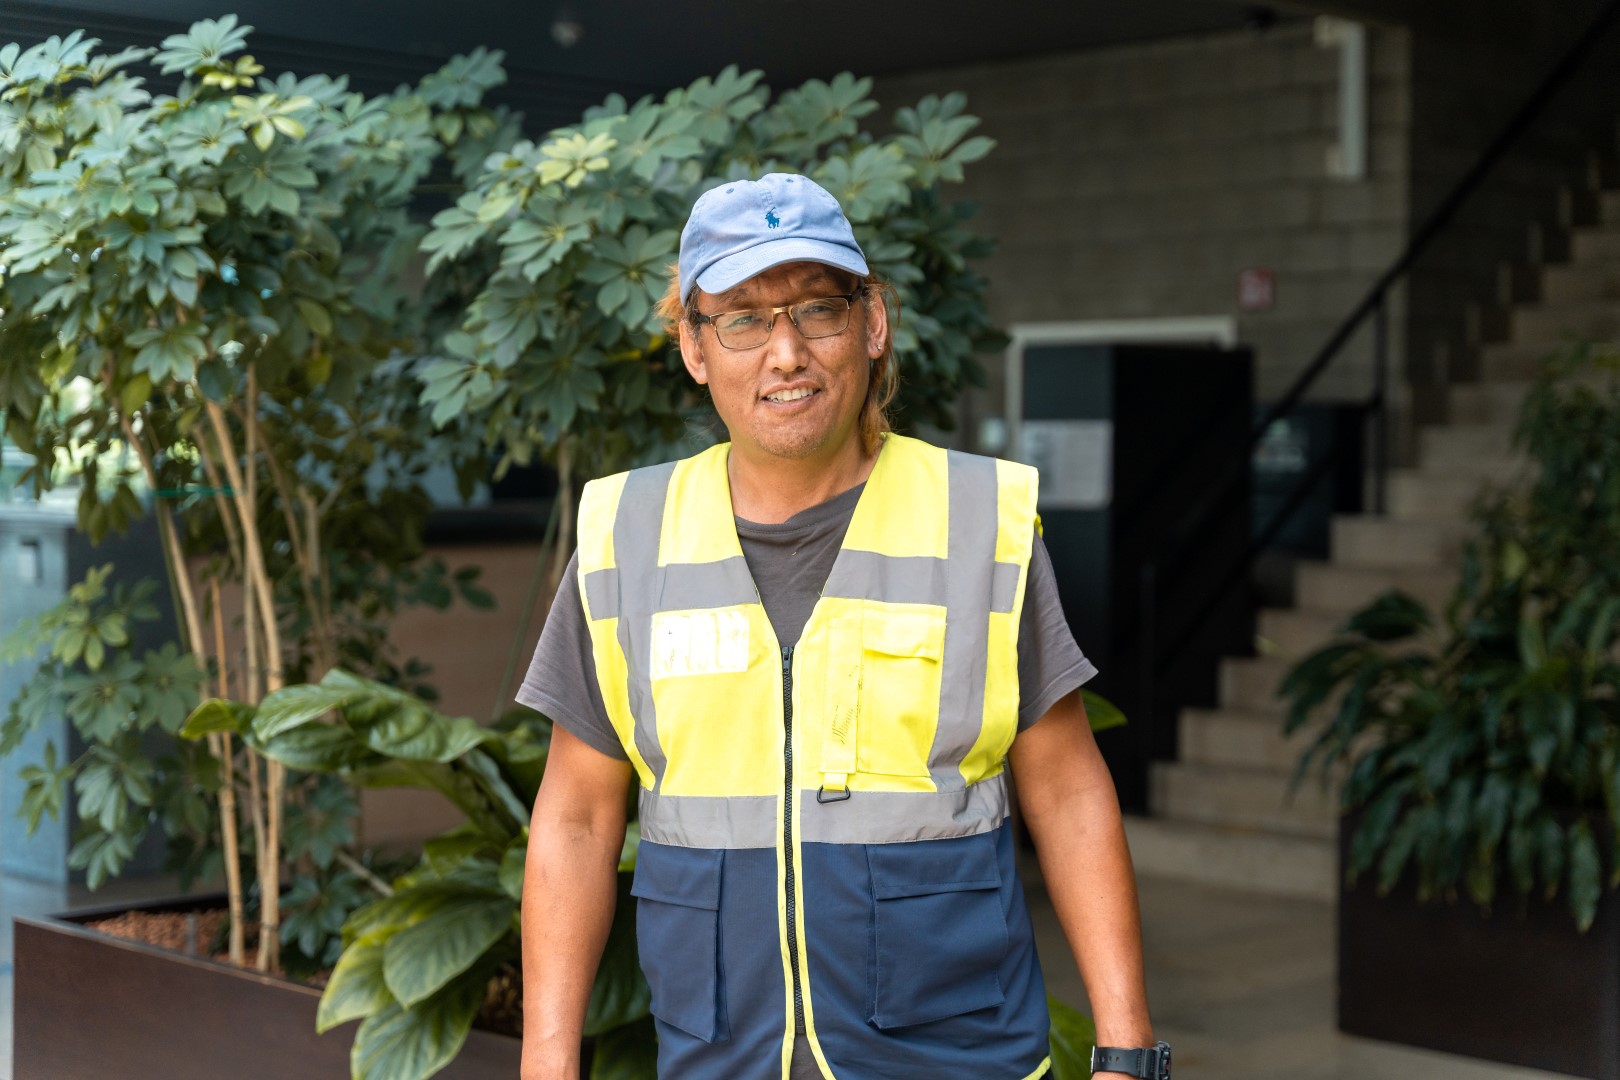 Dorjee arrived in Belgium as one of many refugees, now he has steady work and even worked his way up to brigadier at Green Masters.